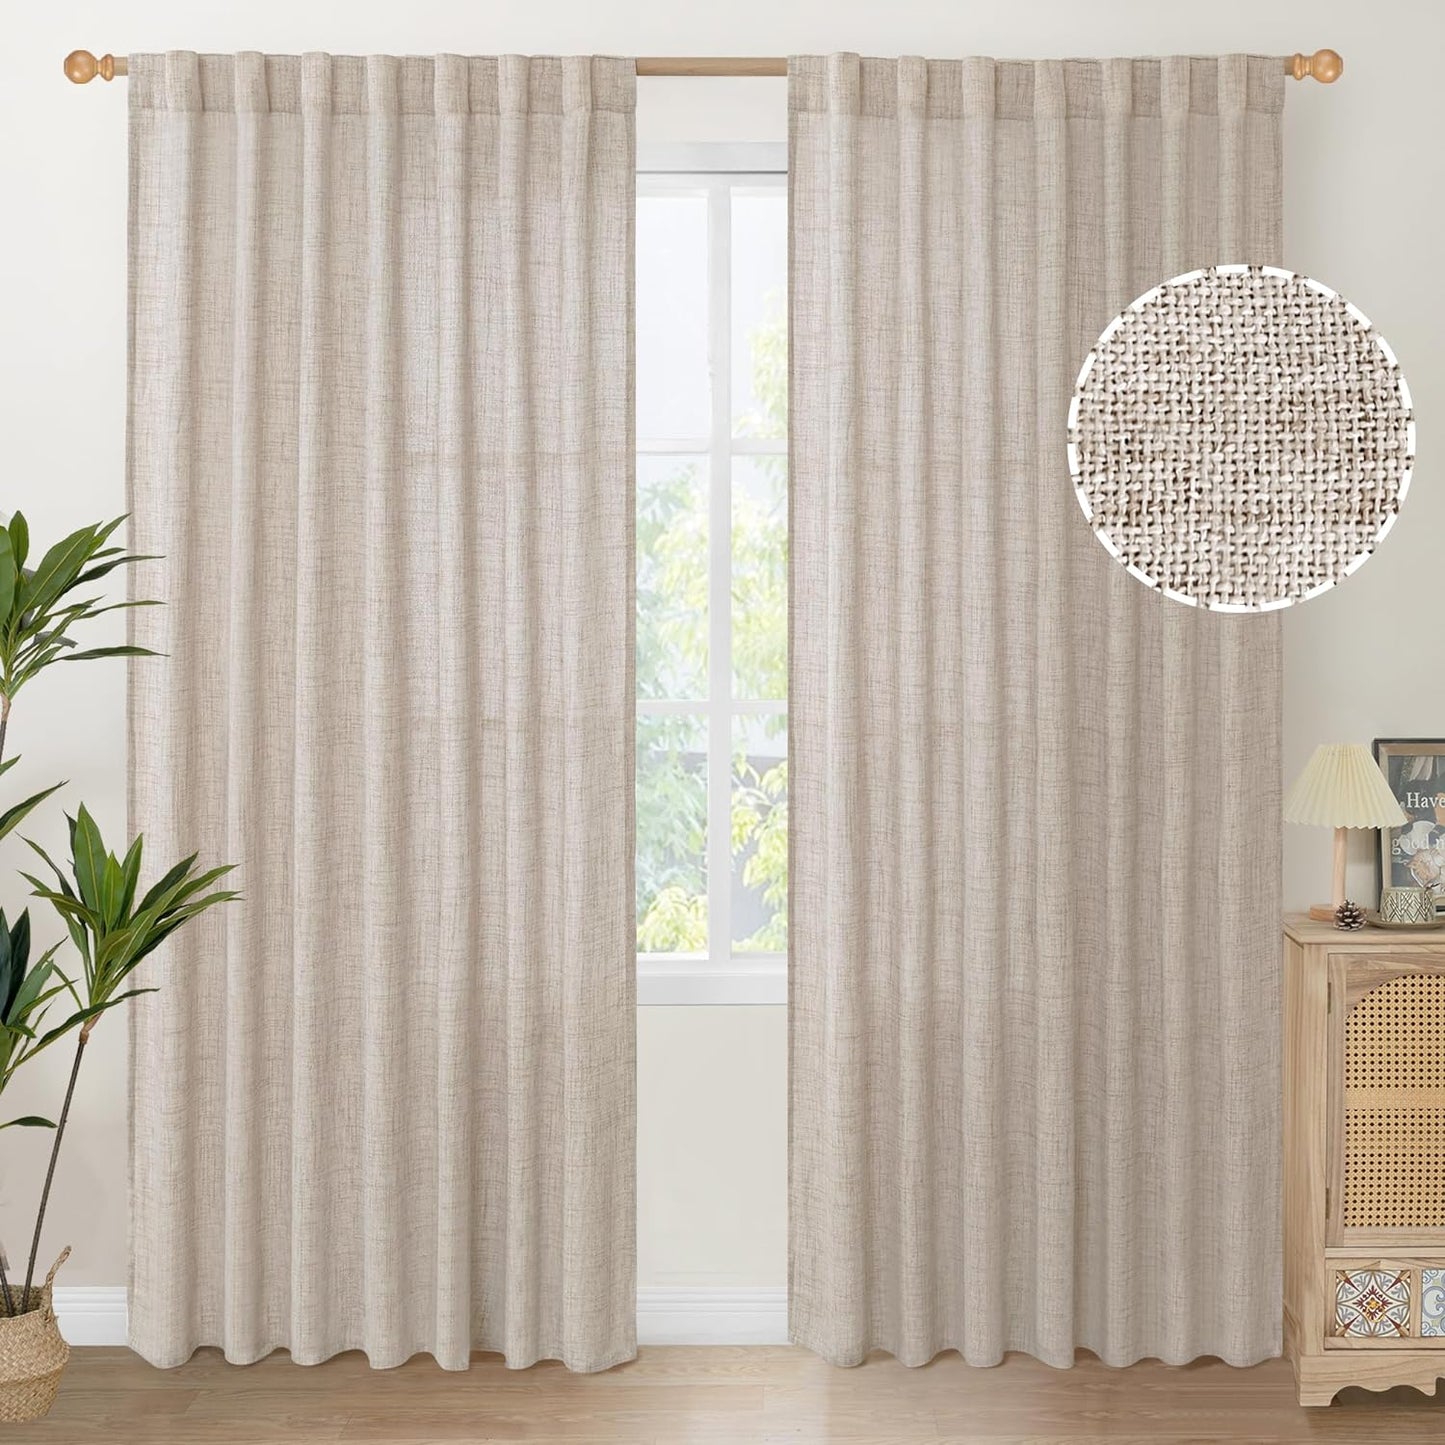 Youngstex Natural Linen Curtains 72 Inch Length 2 Panels for Living Room Light Filtering Textured Window Drapes for Bedroom Dining Office Back Tab Rod Pocket, 52 X 72 Inch  YoungsTex Natural 60W X 84L 